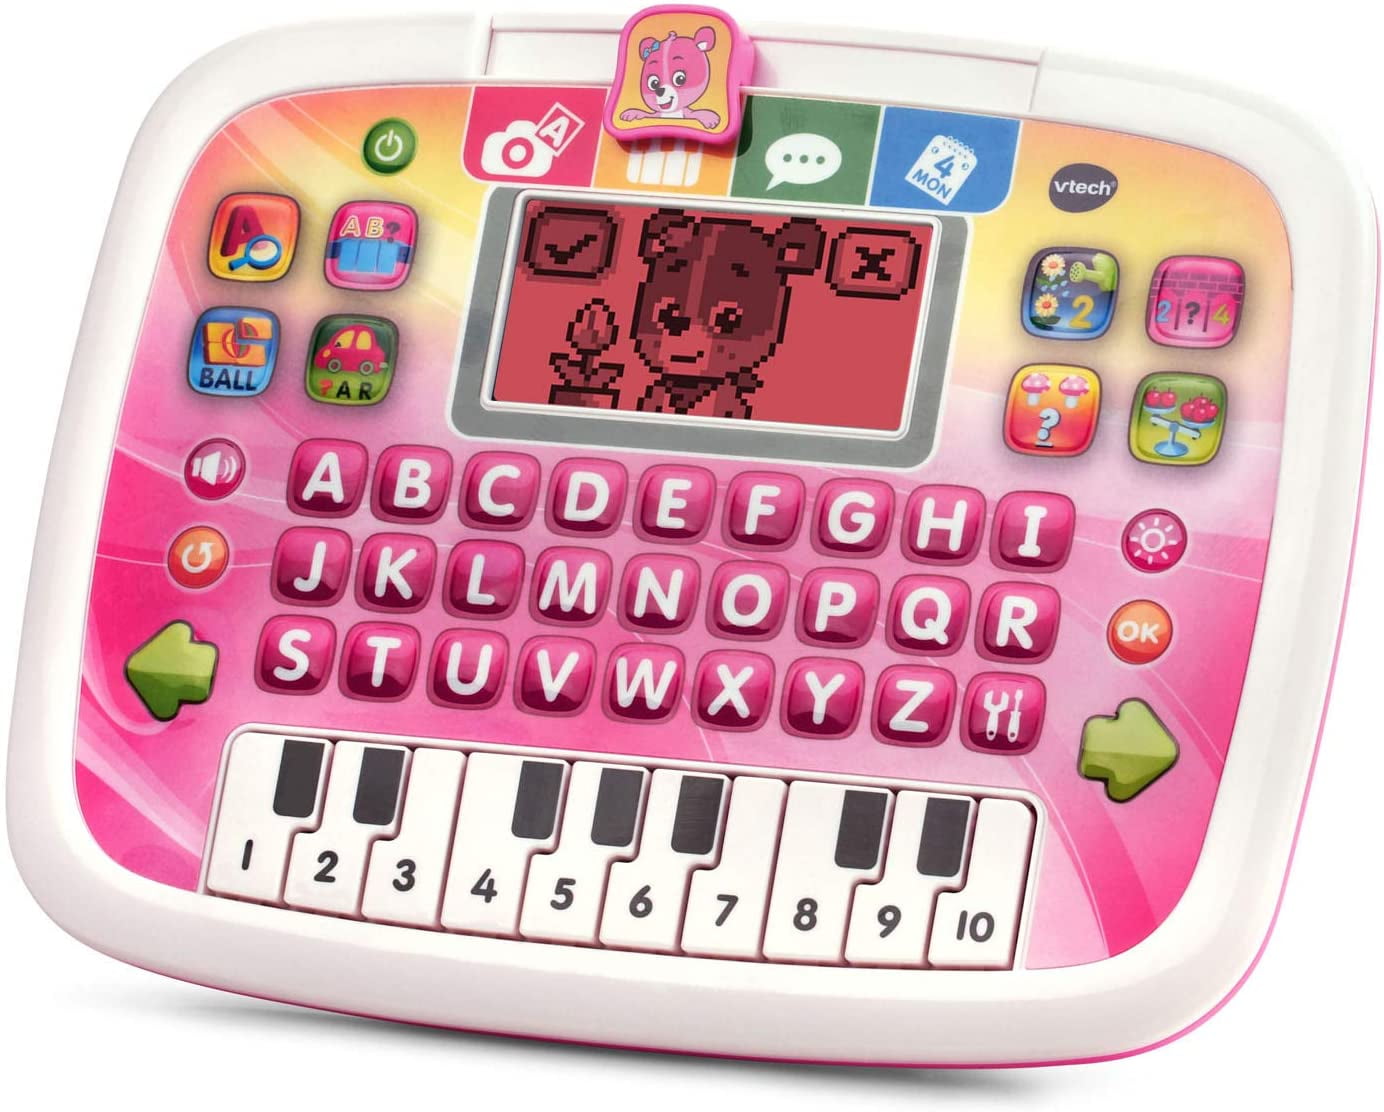 Bourgeon Gebakjes Tektonisch VTech Little Apps Tablet, Pink, Baby tablet features a color changing  screen, letter buttons and piano keyboard; role-play kids electronic toy..,  By Visit the VTech Store - Walmart.com